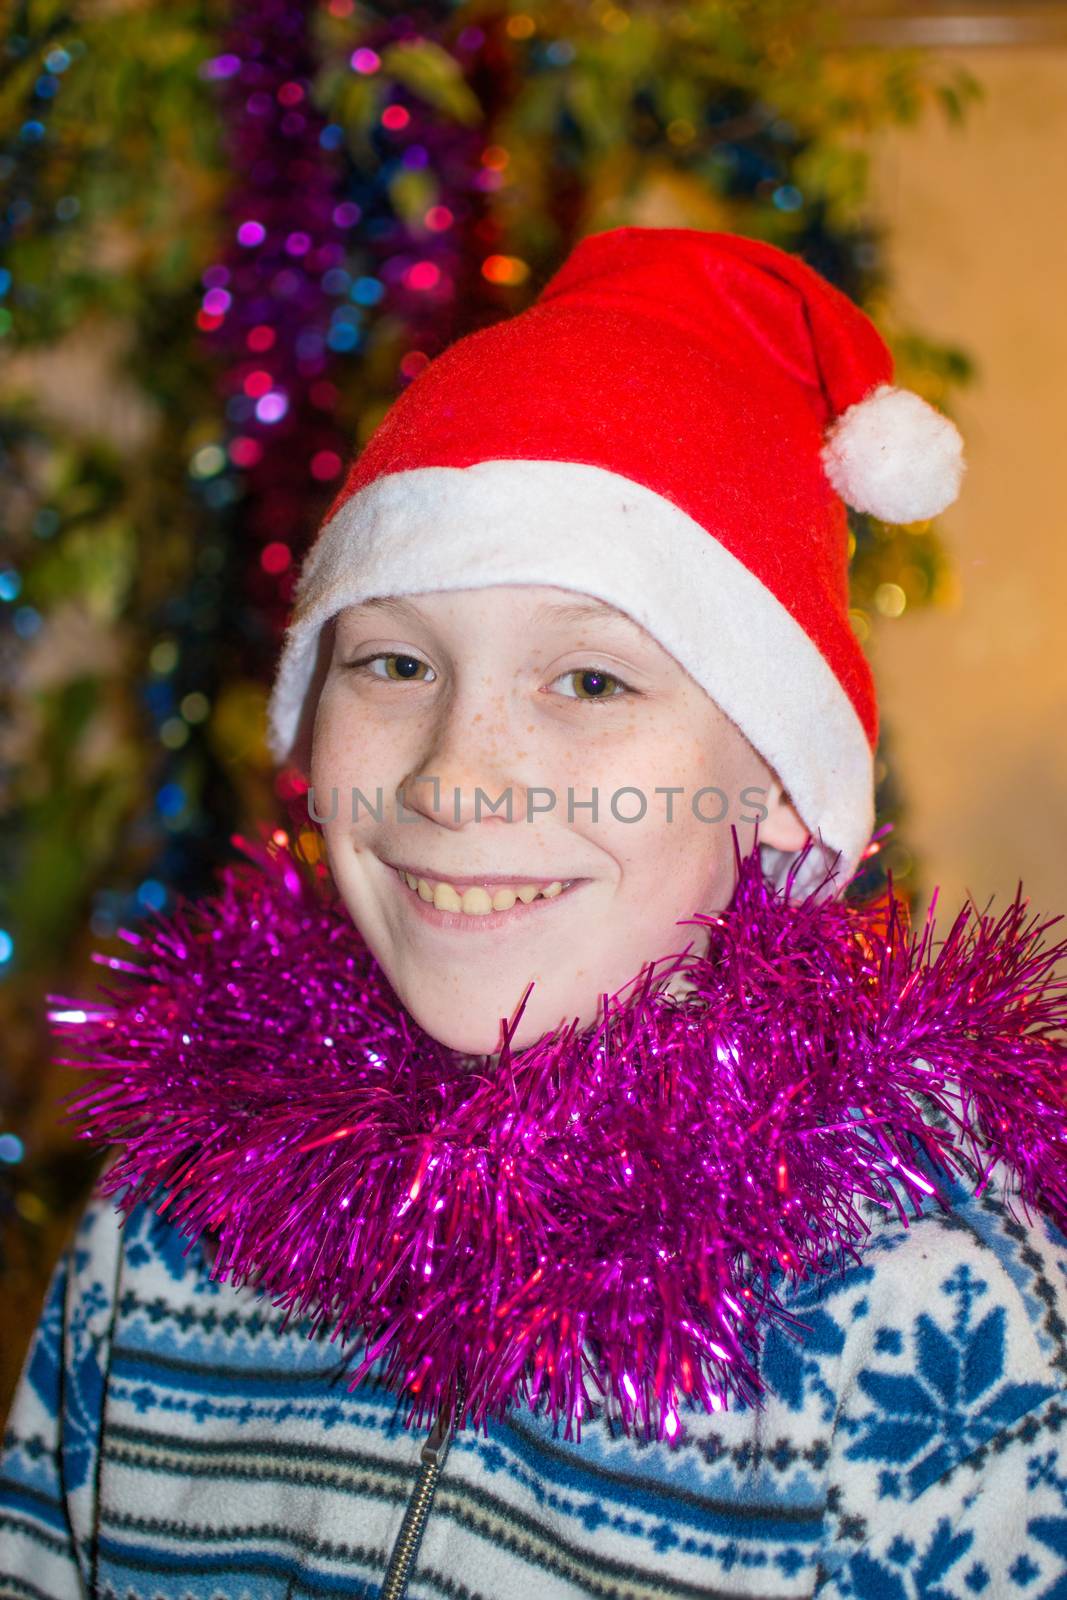 The teenage boy's portrait in a Christmas red hat